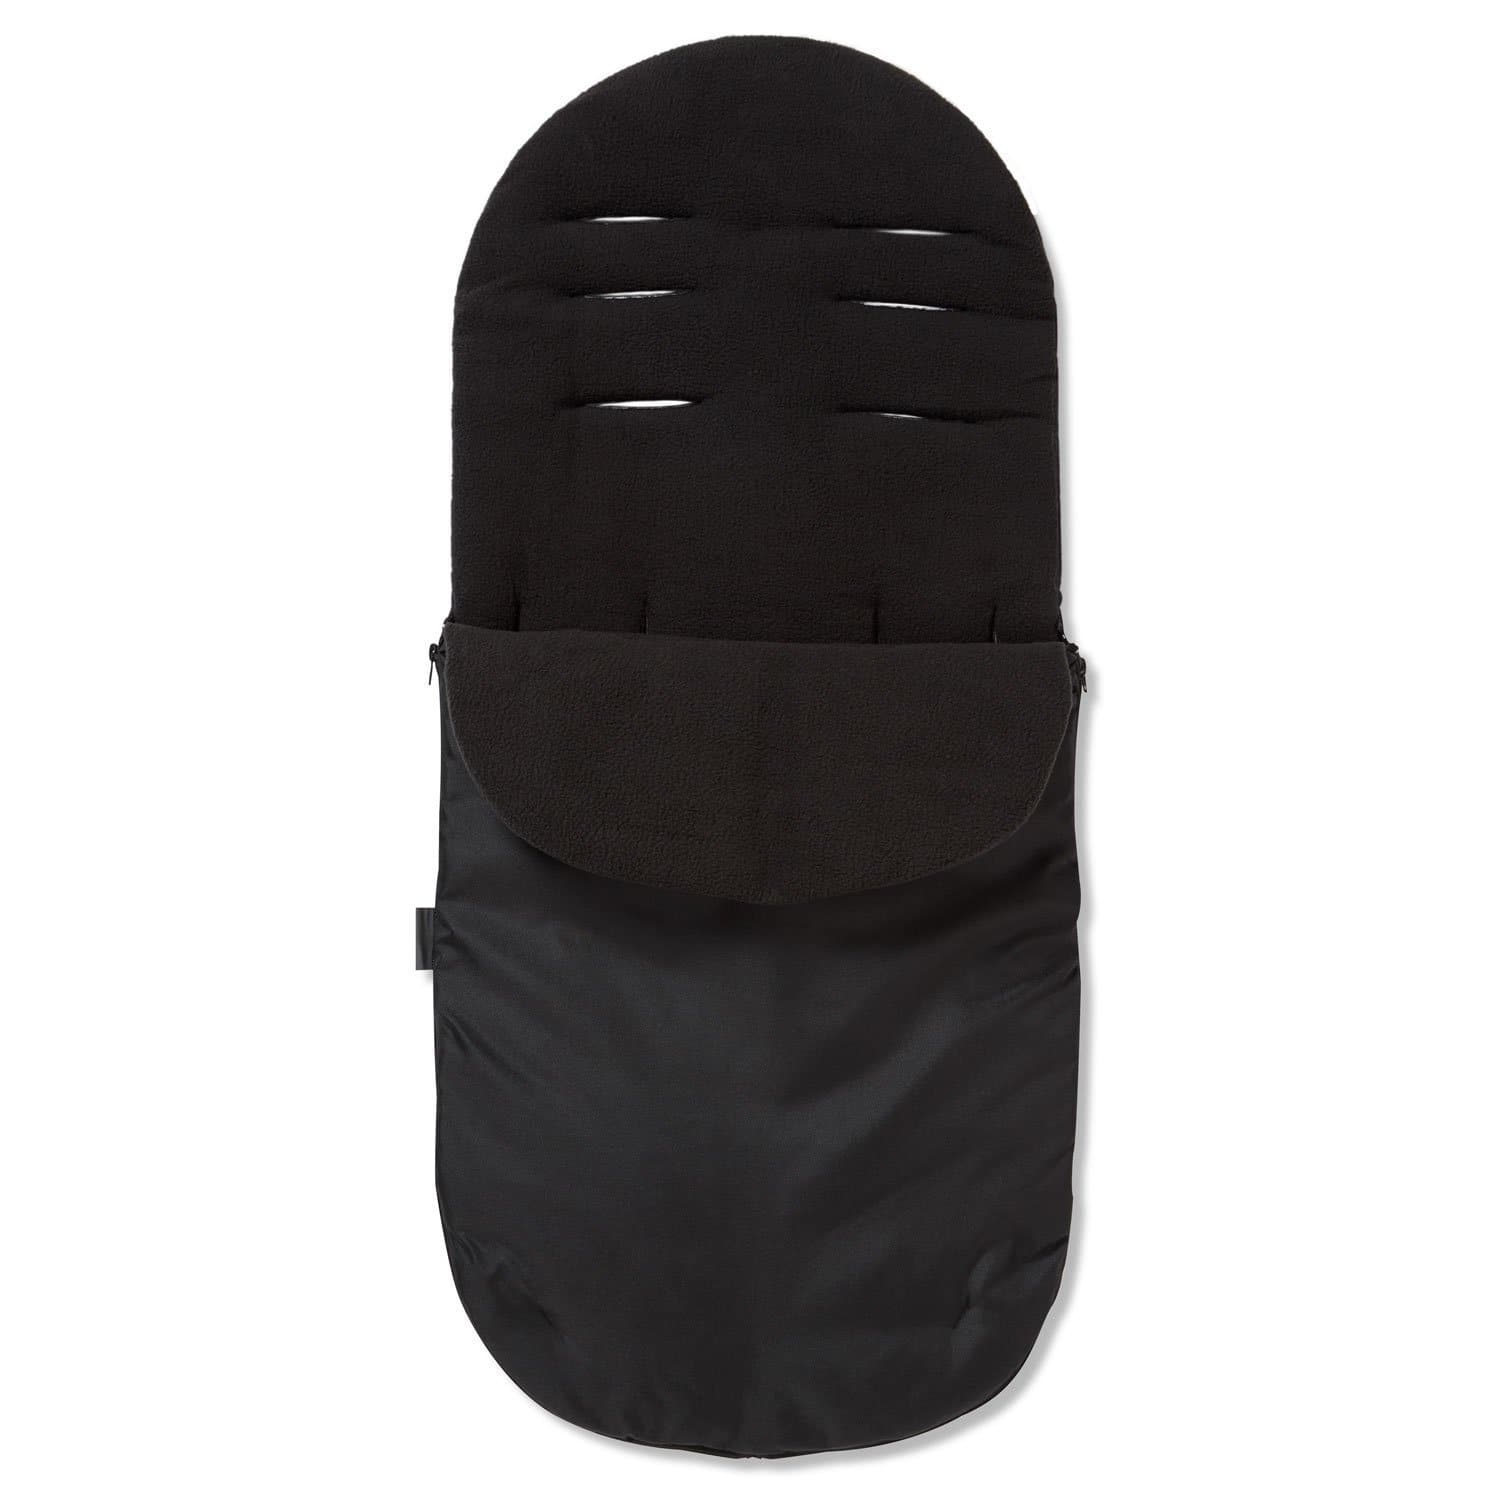 Footmuff / Cosy Toes Compatible with Babylo - Black / Fits All Models | For Your Little One